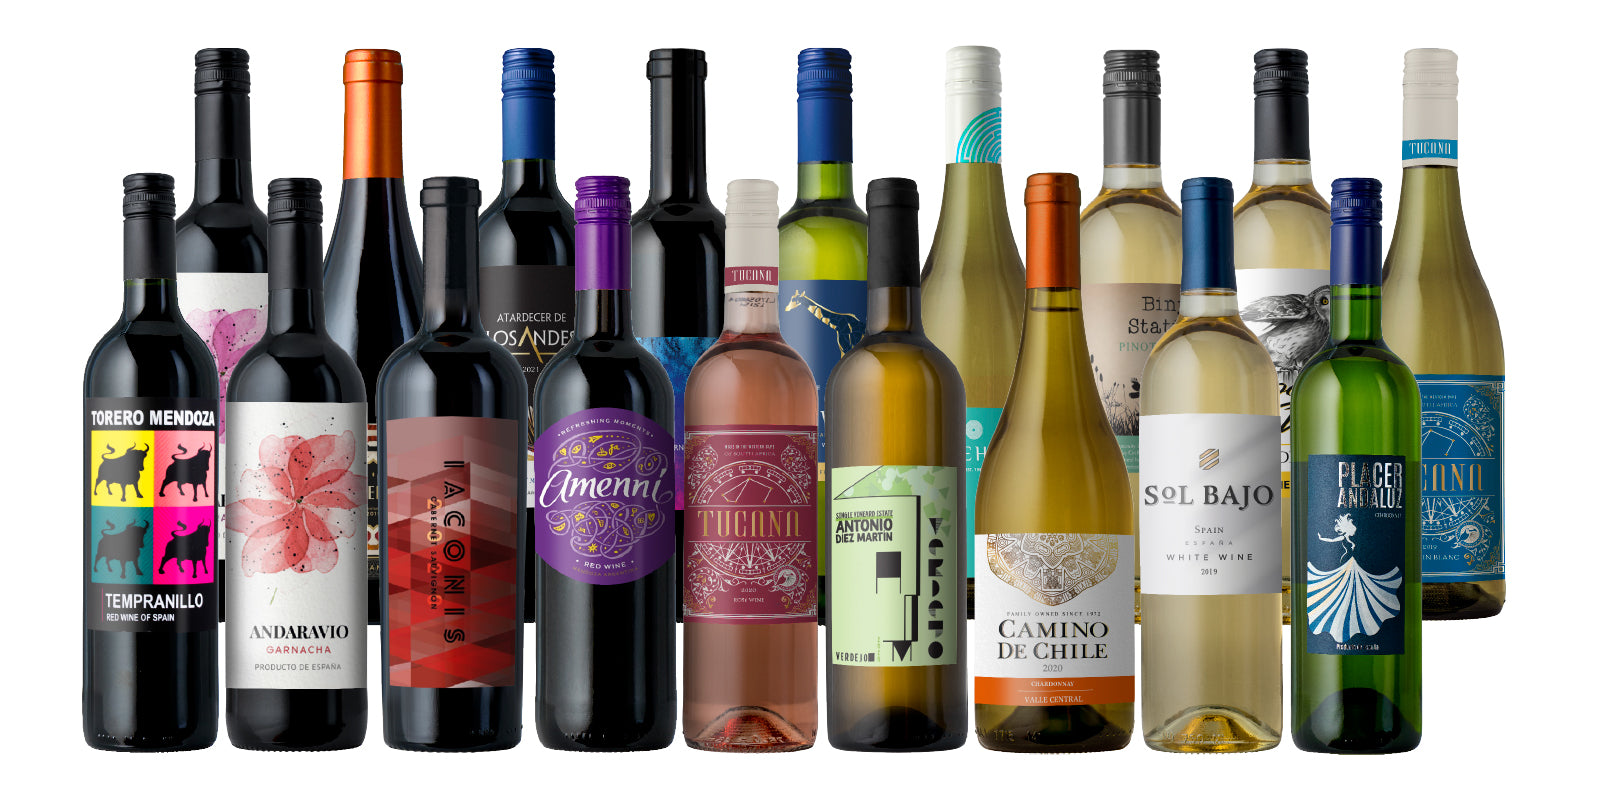 Groupon Top 18 Wines for Fall 18-Pack*